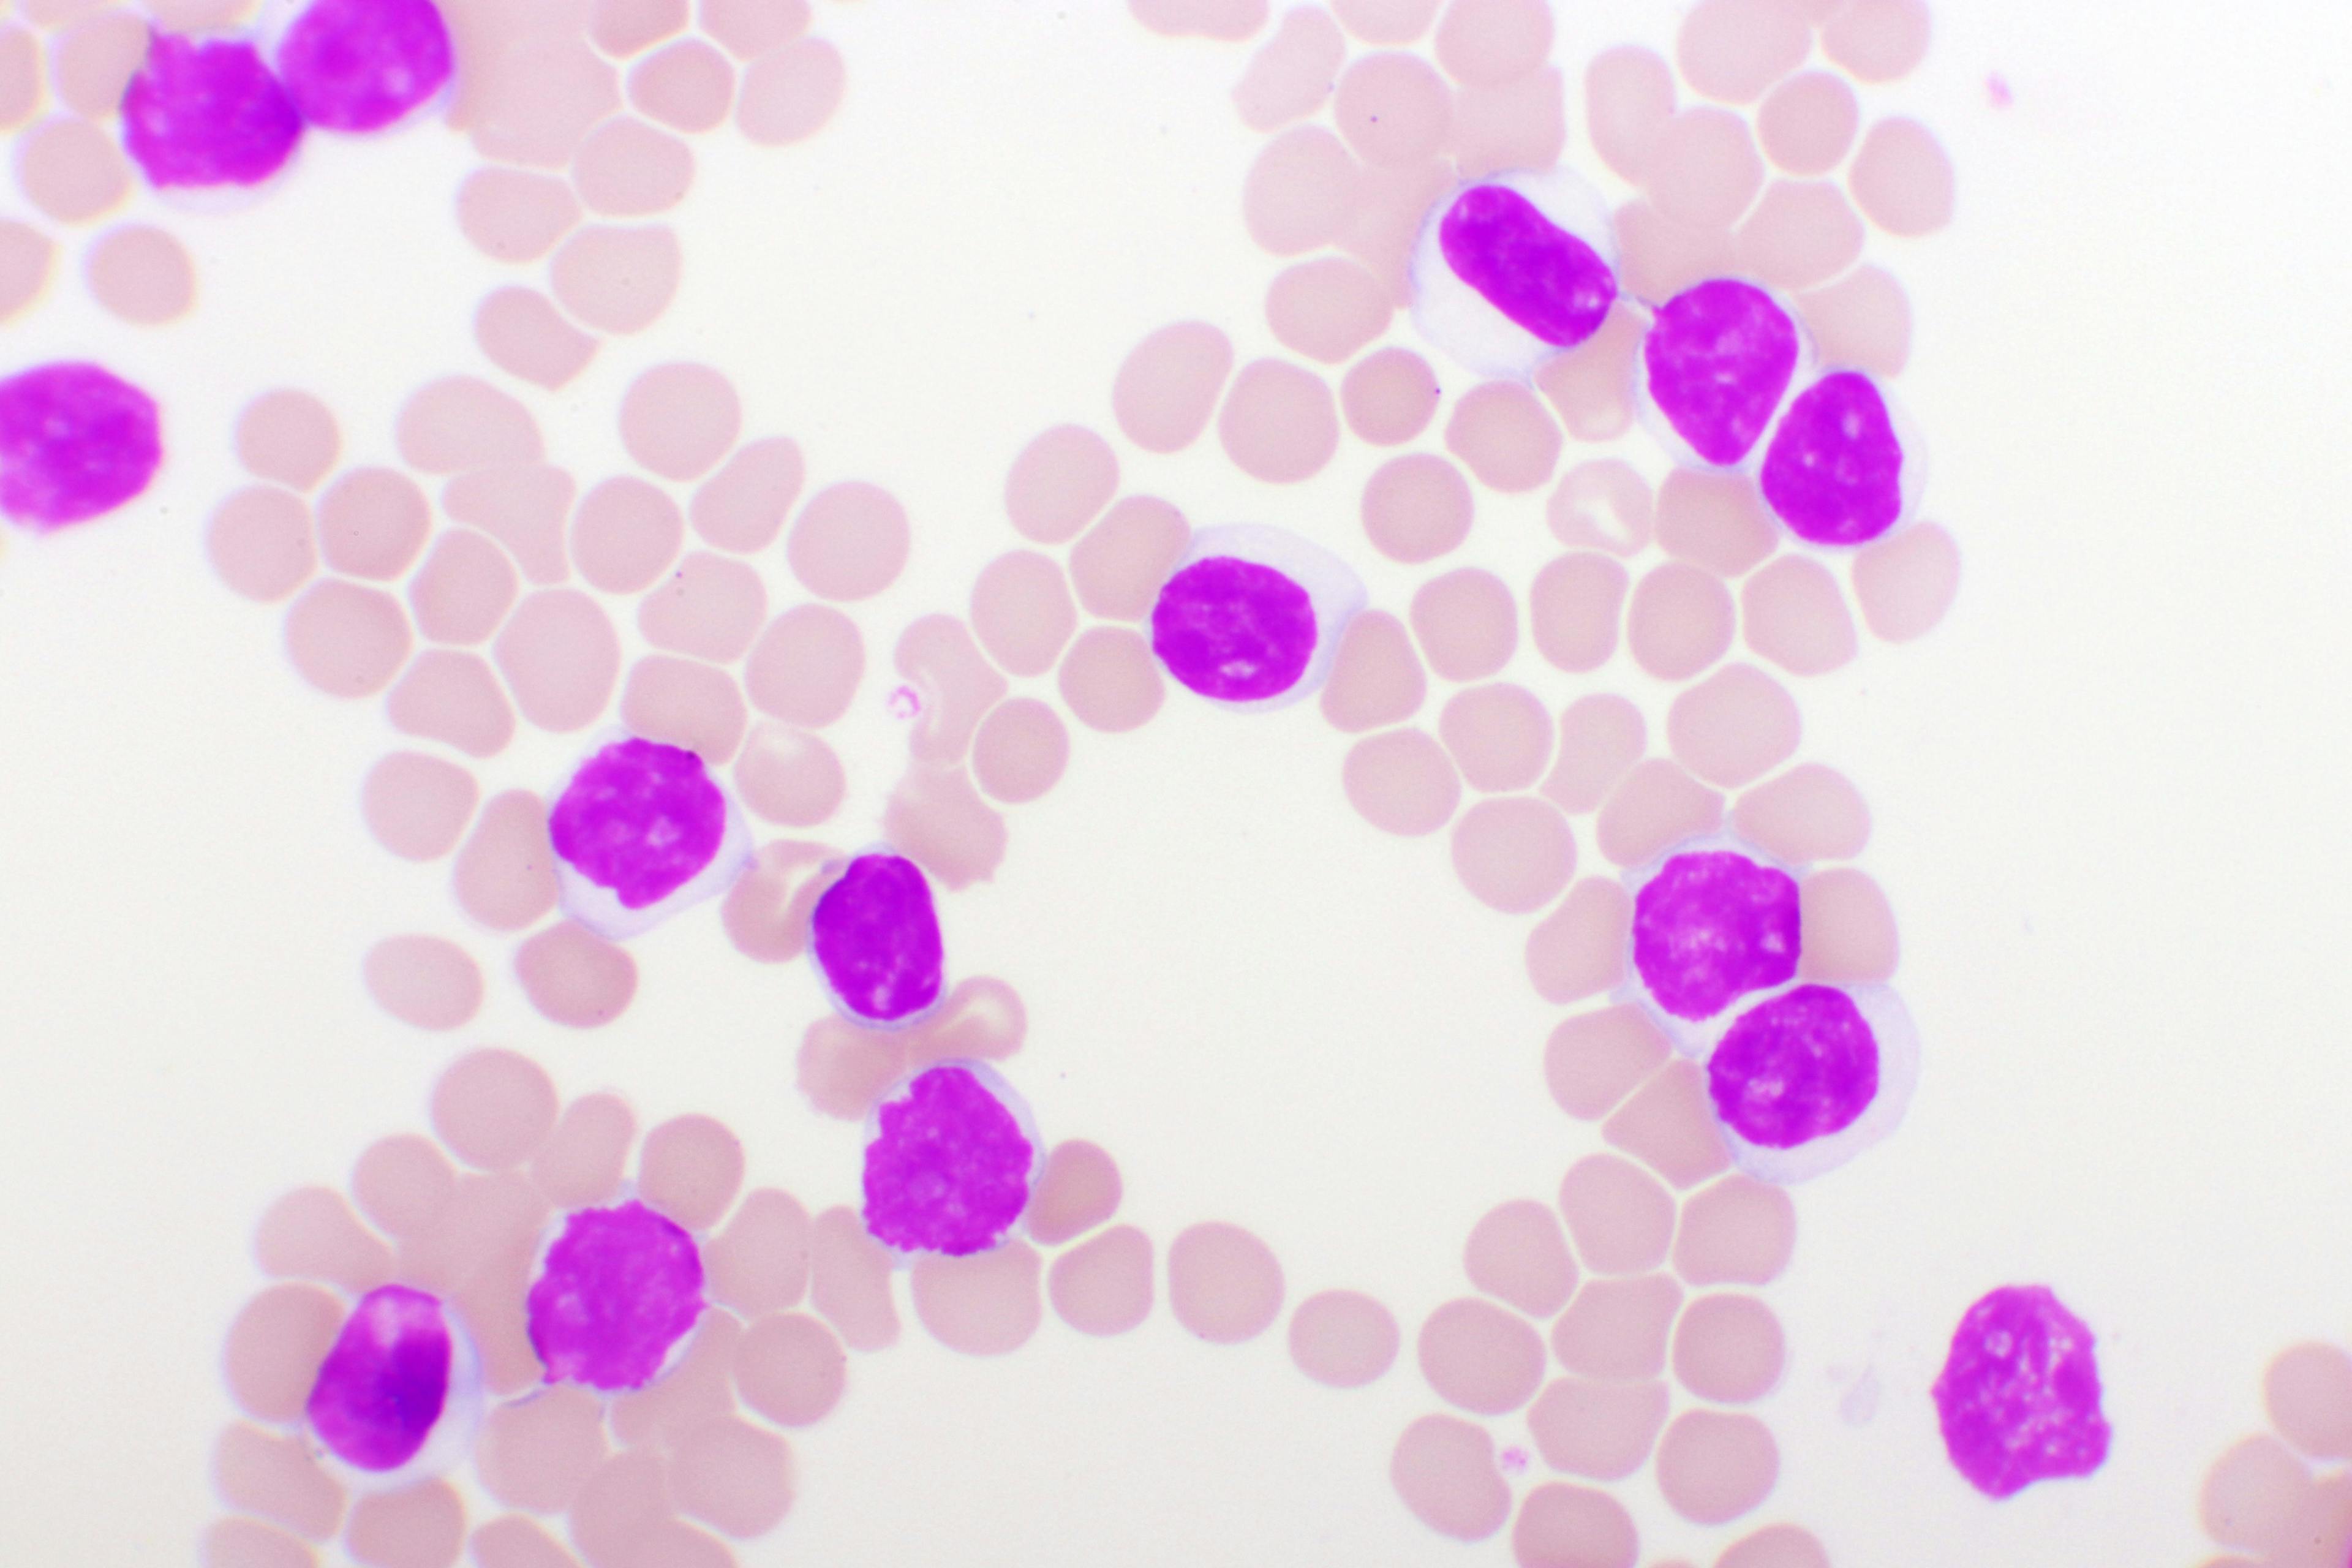 Front-Line Imbruvica-Venclexta Combo May Induce Durable Responses in Chronic Lymphocytic Leukemia and Small Lymphocytic Lymphoma